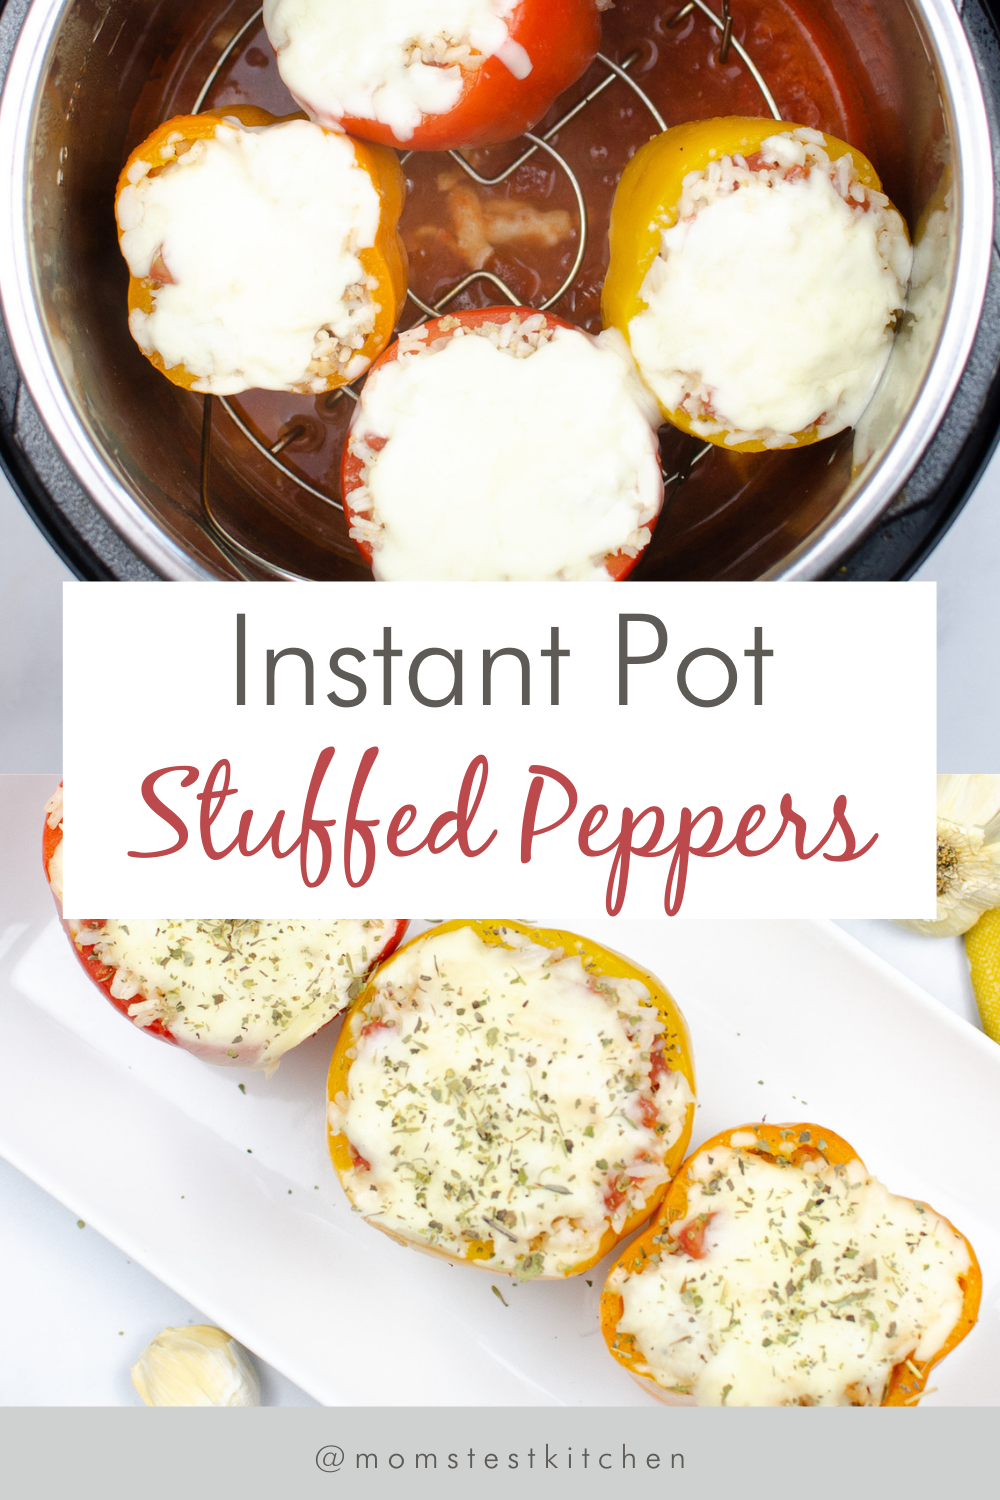 Instant Pot Stuffed Peppers are the perfect weeknight meal. Colorful bell peppers are stuffed with a delicious turkey filling packed with big Italian flavor. Easy, tasty comfort food classic!